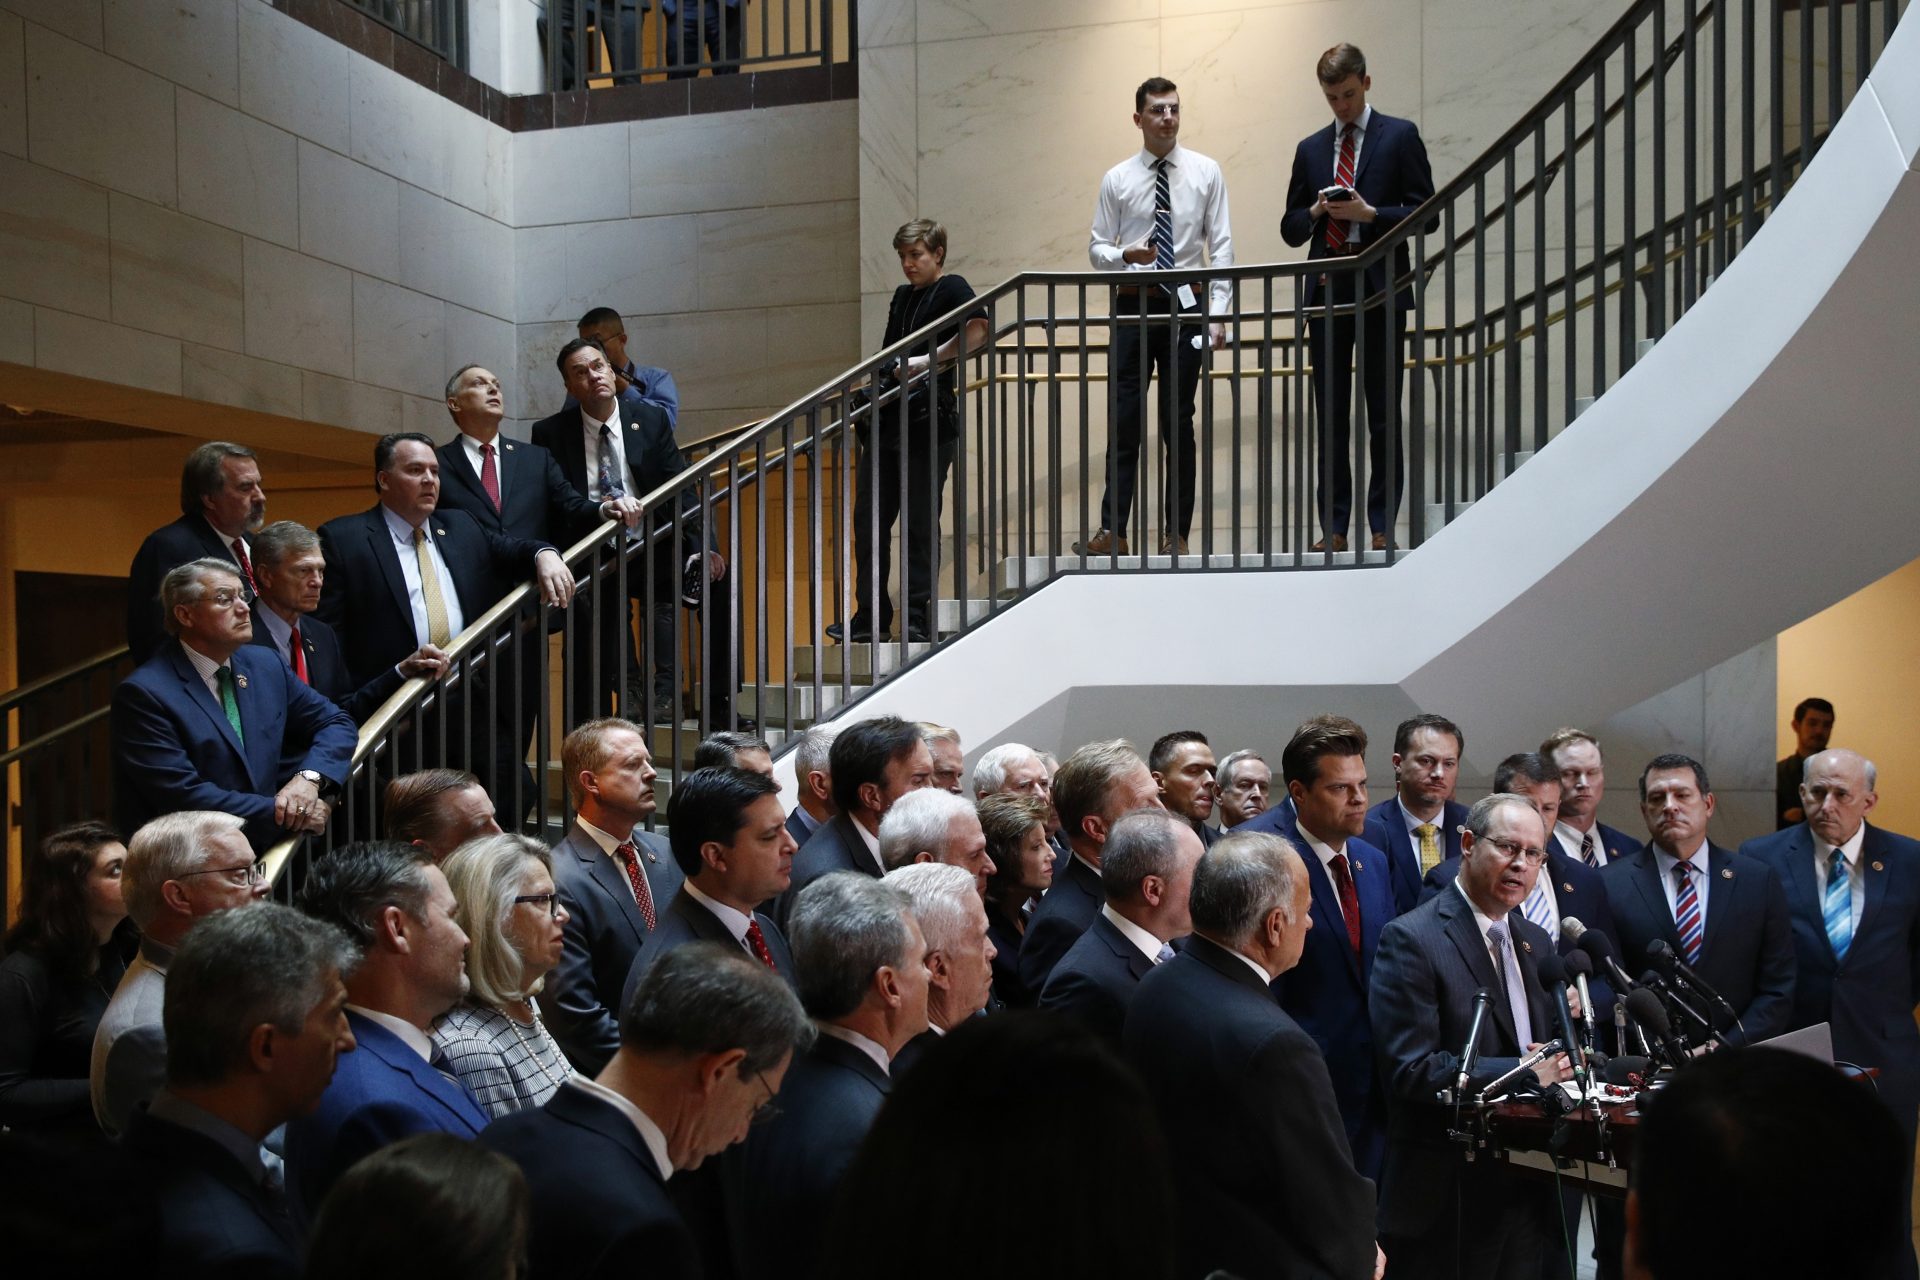 House Republicans gather for a news conference after Deputy Assistant Secretary of Defense Laura Cooper arrived for a closed door meeting to testify as part of the House impeachment inquiry into President Donald Trump, Wednesday, Oct. 23, 2019, on Capitol Hill in Washington.